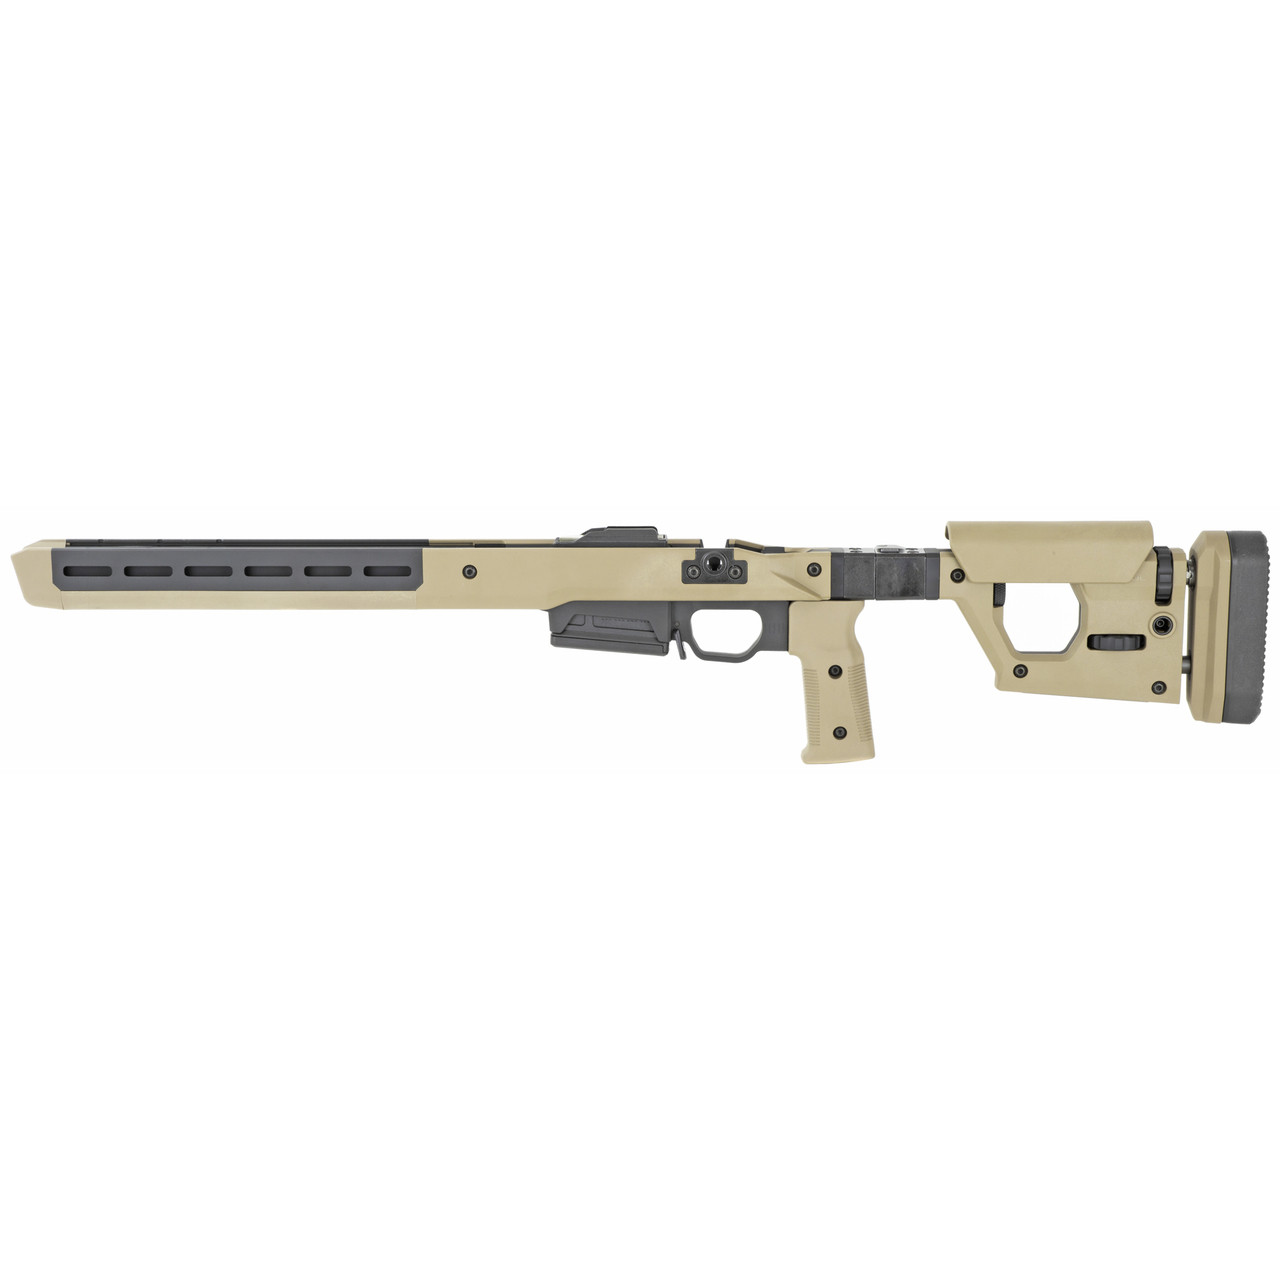 Shop Best Selling Rifle Stock and Chassis 